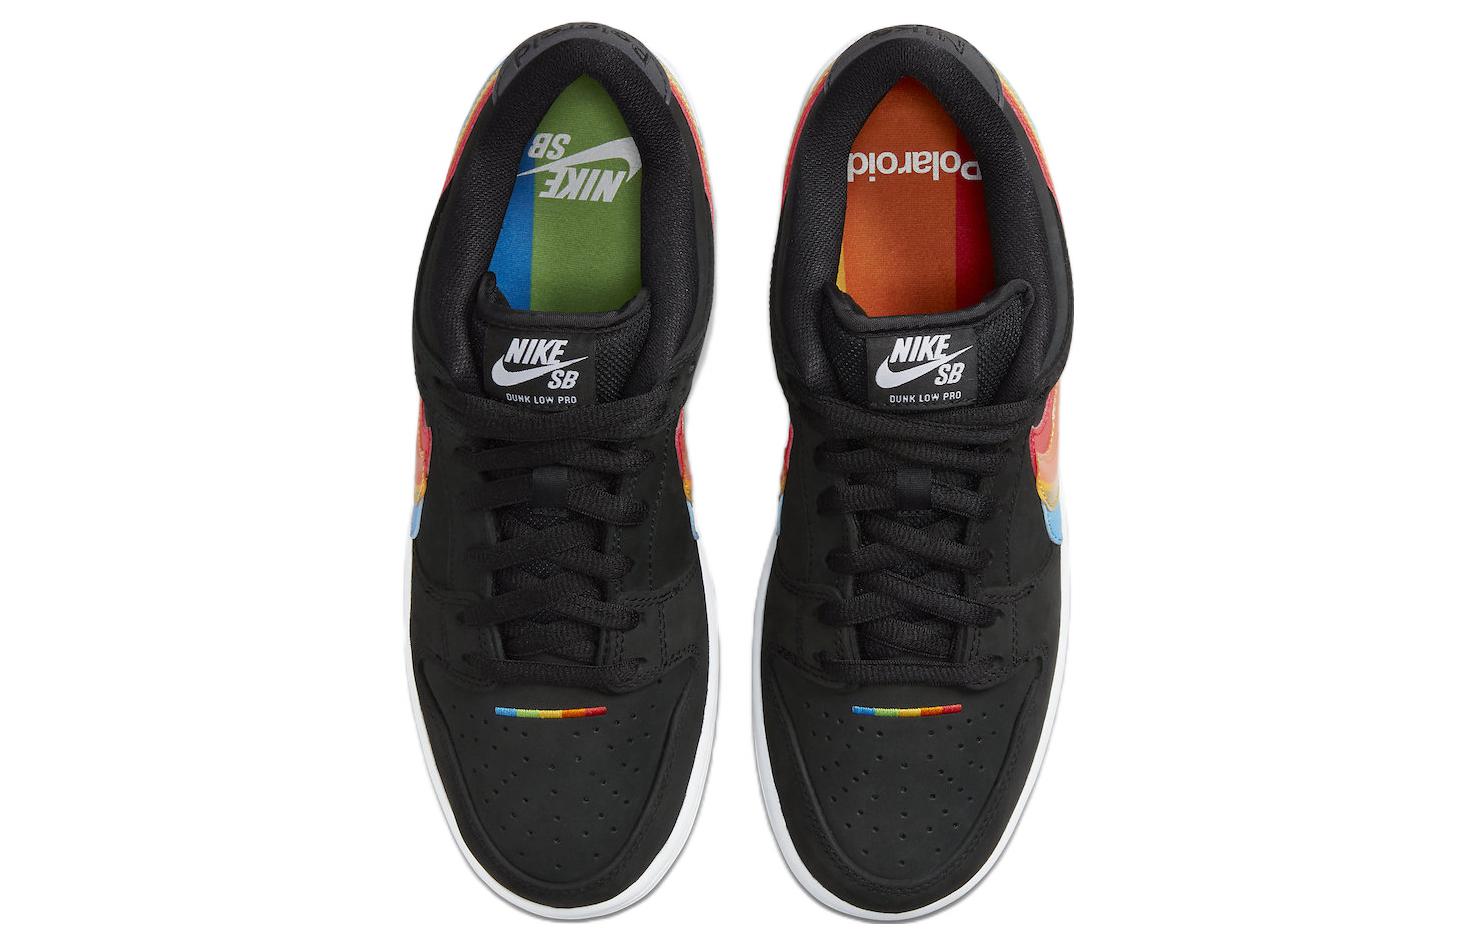 Polaroid x Nike SB Skateboard Dunk Low \'Black White Red\'  DH7722-001 Iconic Trainers